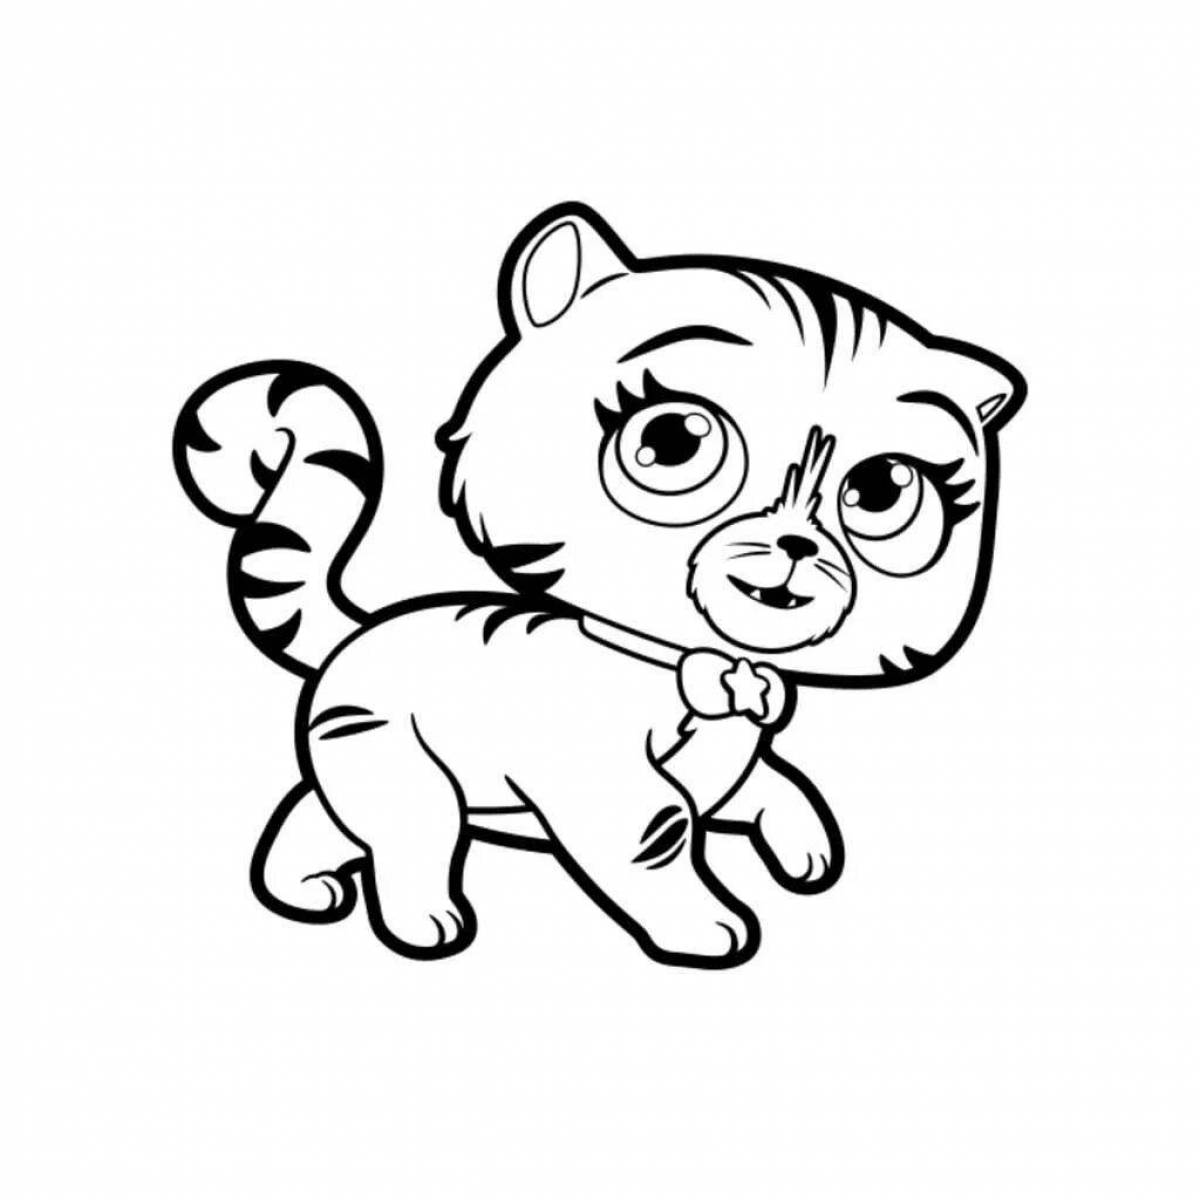 Amazing cartoon cats coloring pages